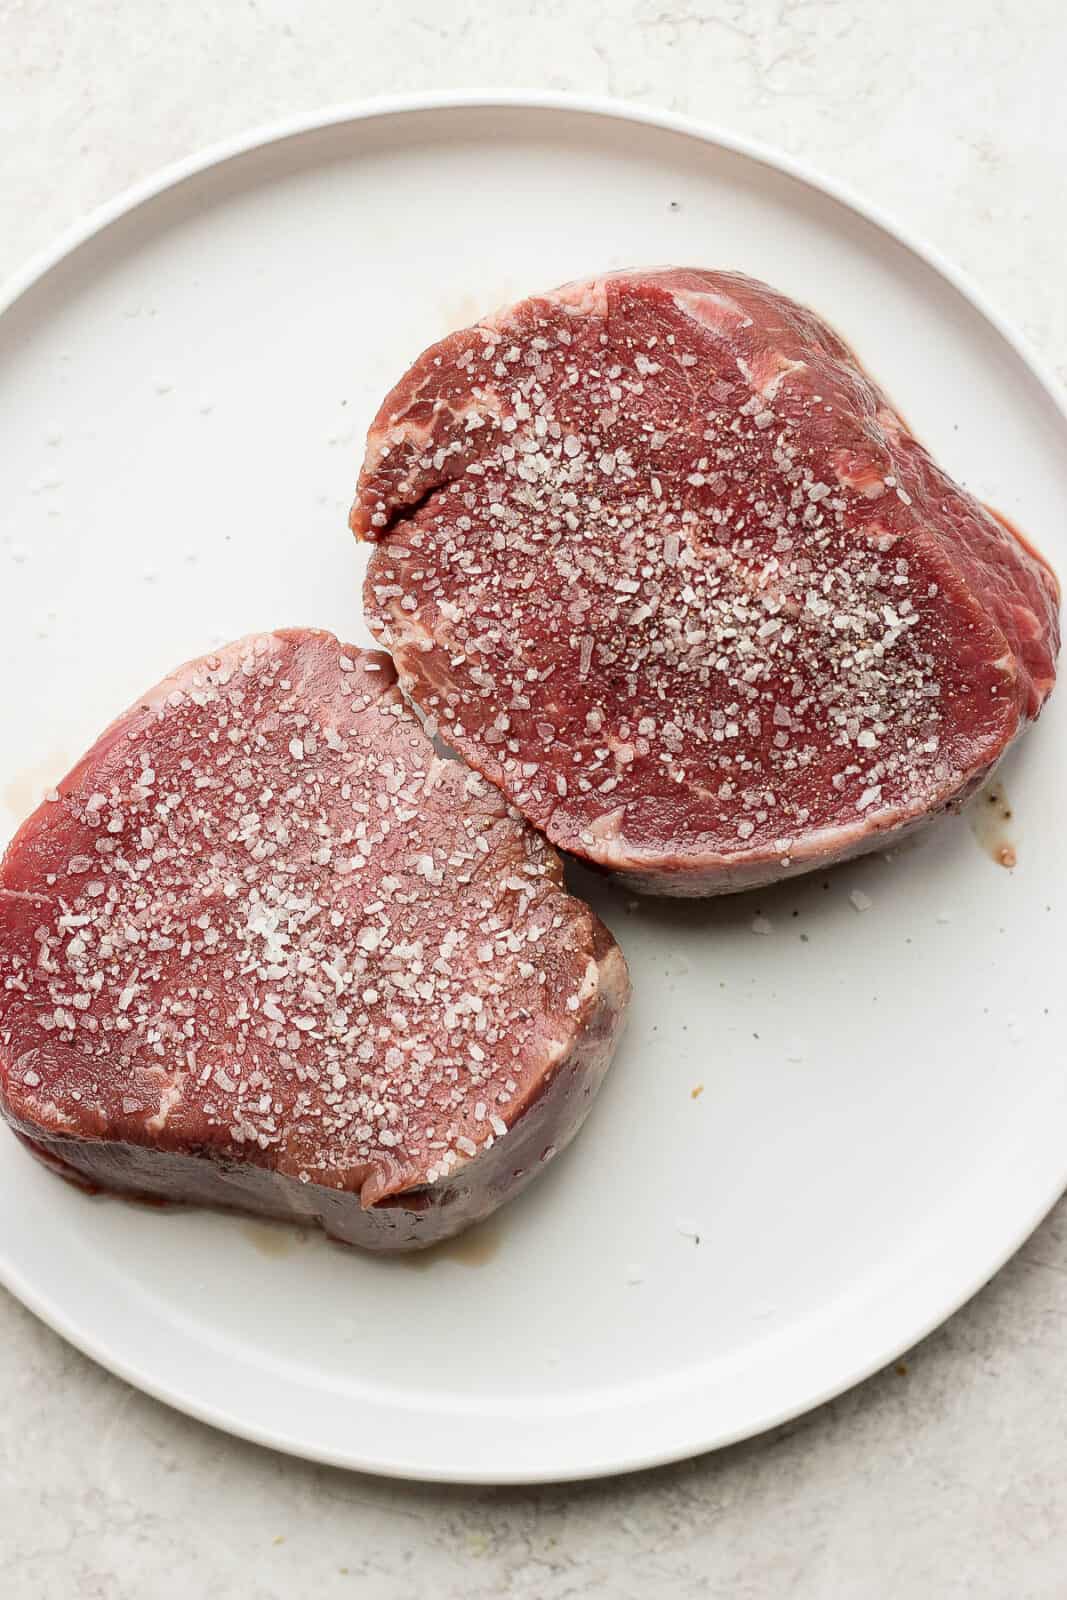 A plate with two sirloin steaks on it seasoned with salt and pepper.